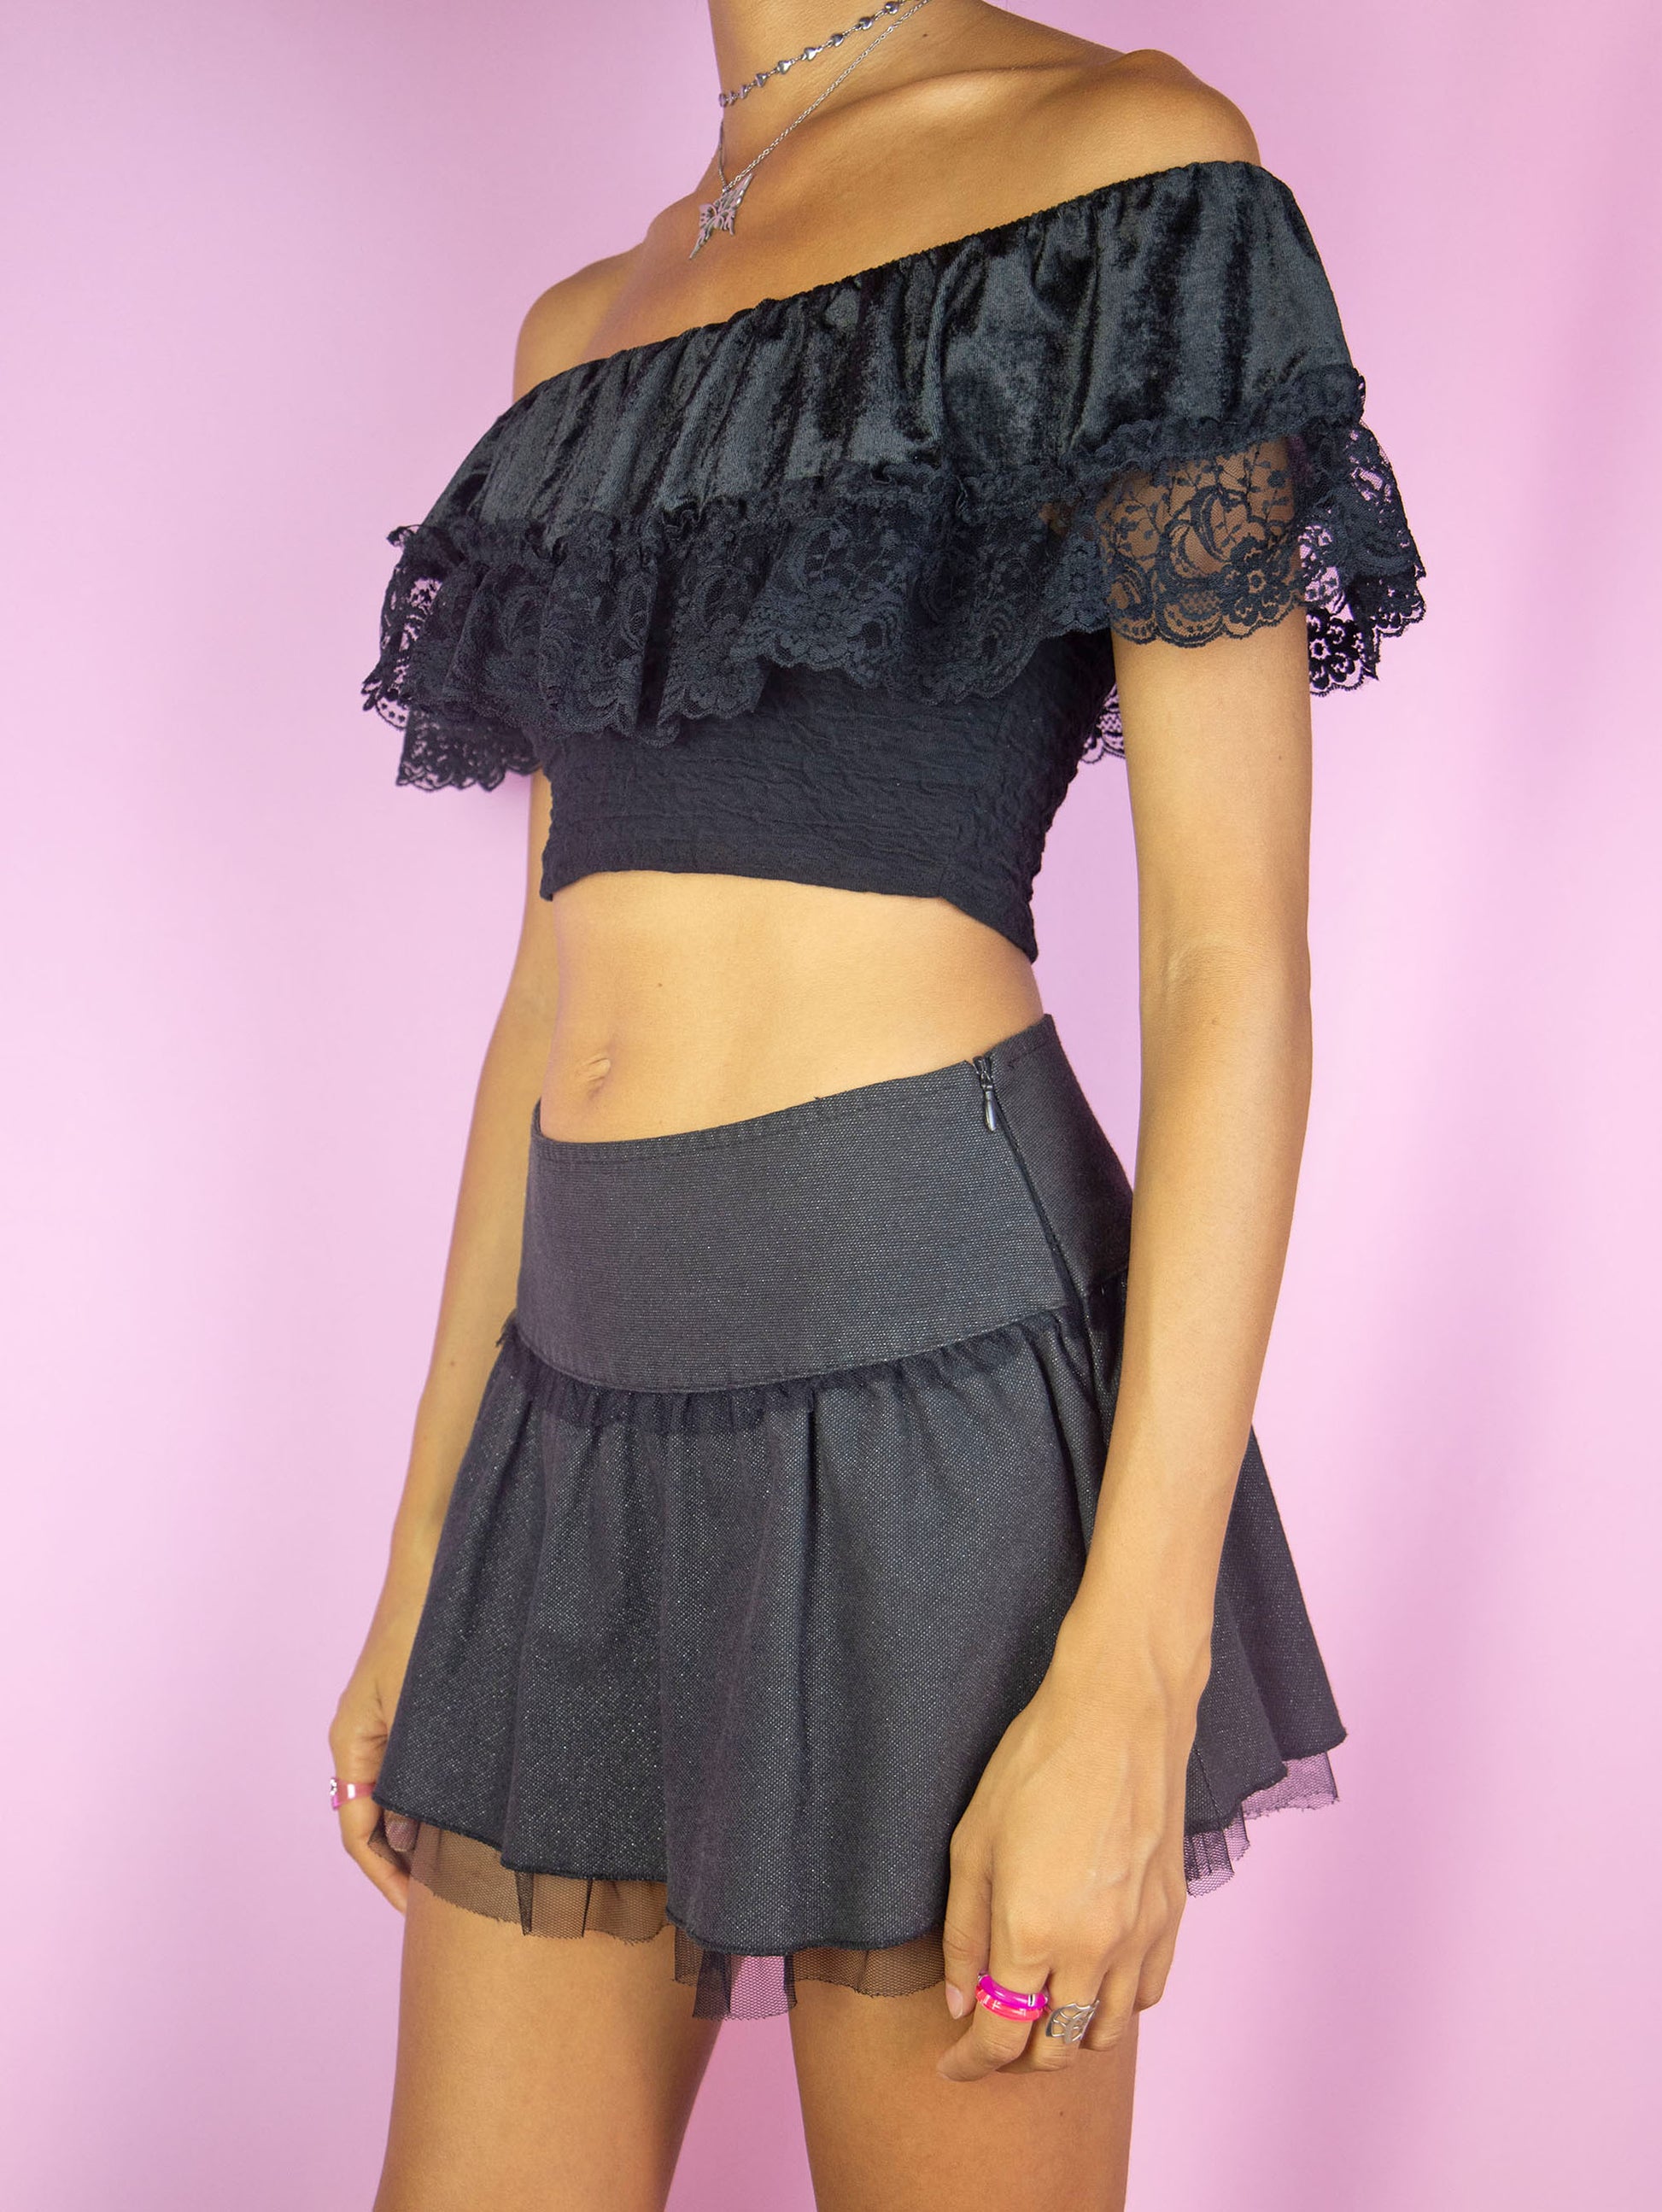 The Vintage 90s Black Off Shoulder Crop Top is a black off shoulder top with velvet and lace ruched ruffle detail. Fairy grunge whimsygoth 1990s summer party shirt.